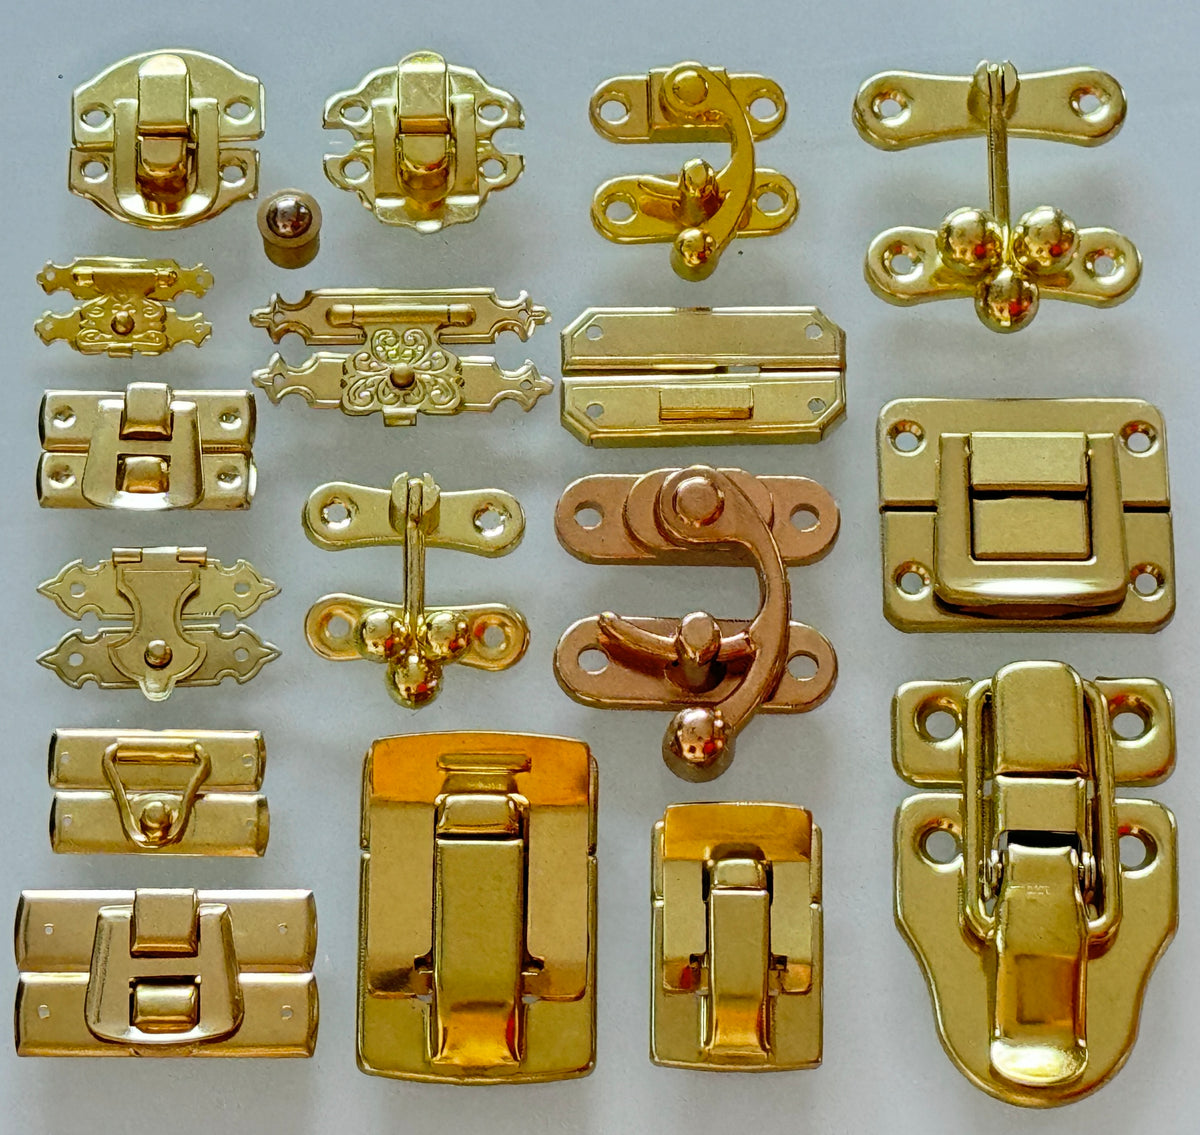 Brass Latches & Catches – Small Box Hardware